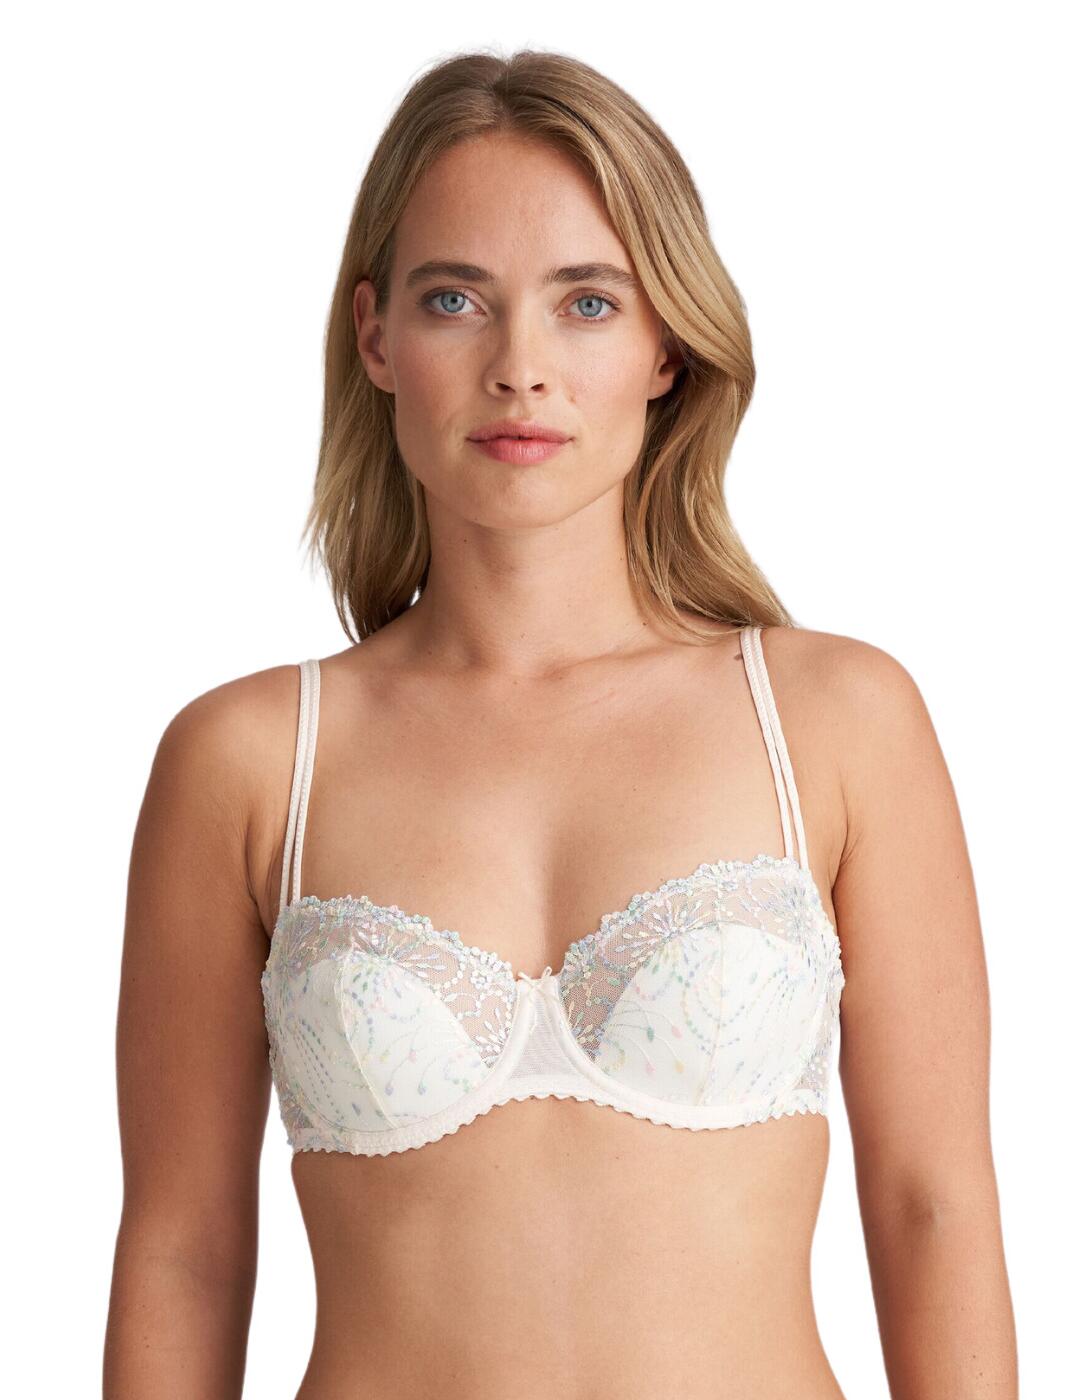 What is a balcony bra?, Buyers' Guide